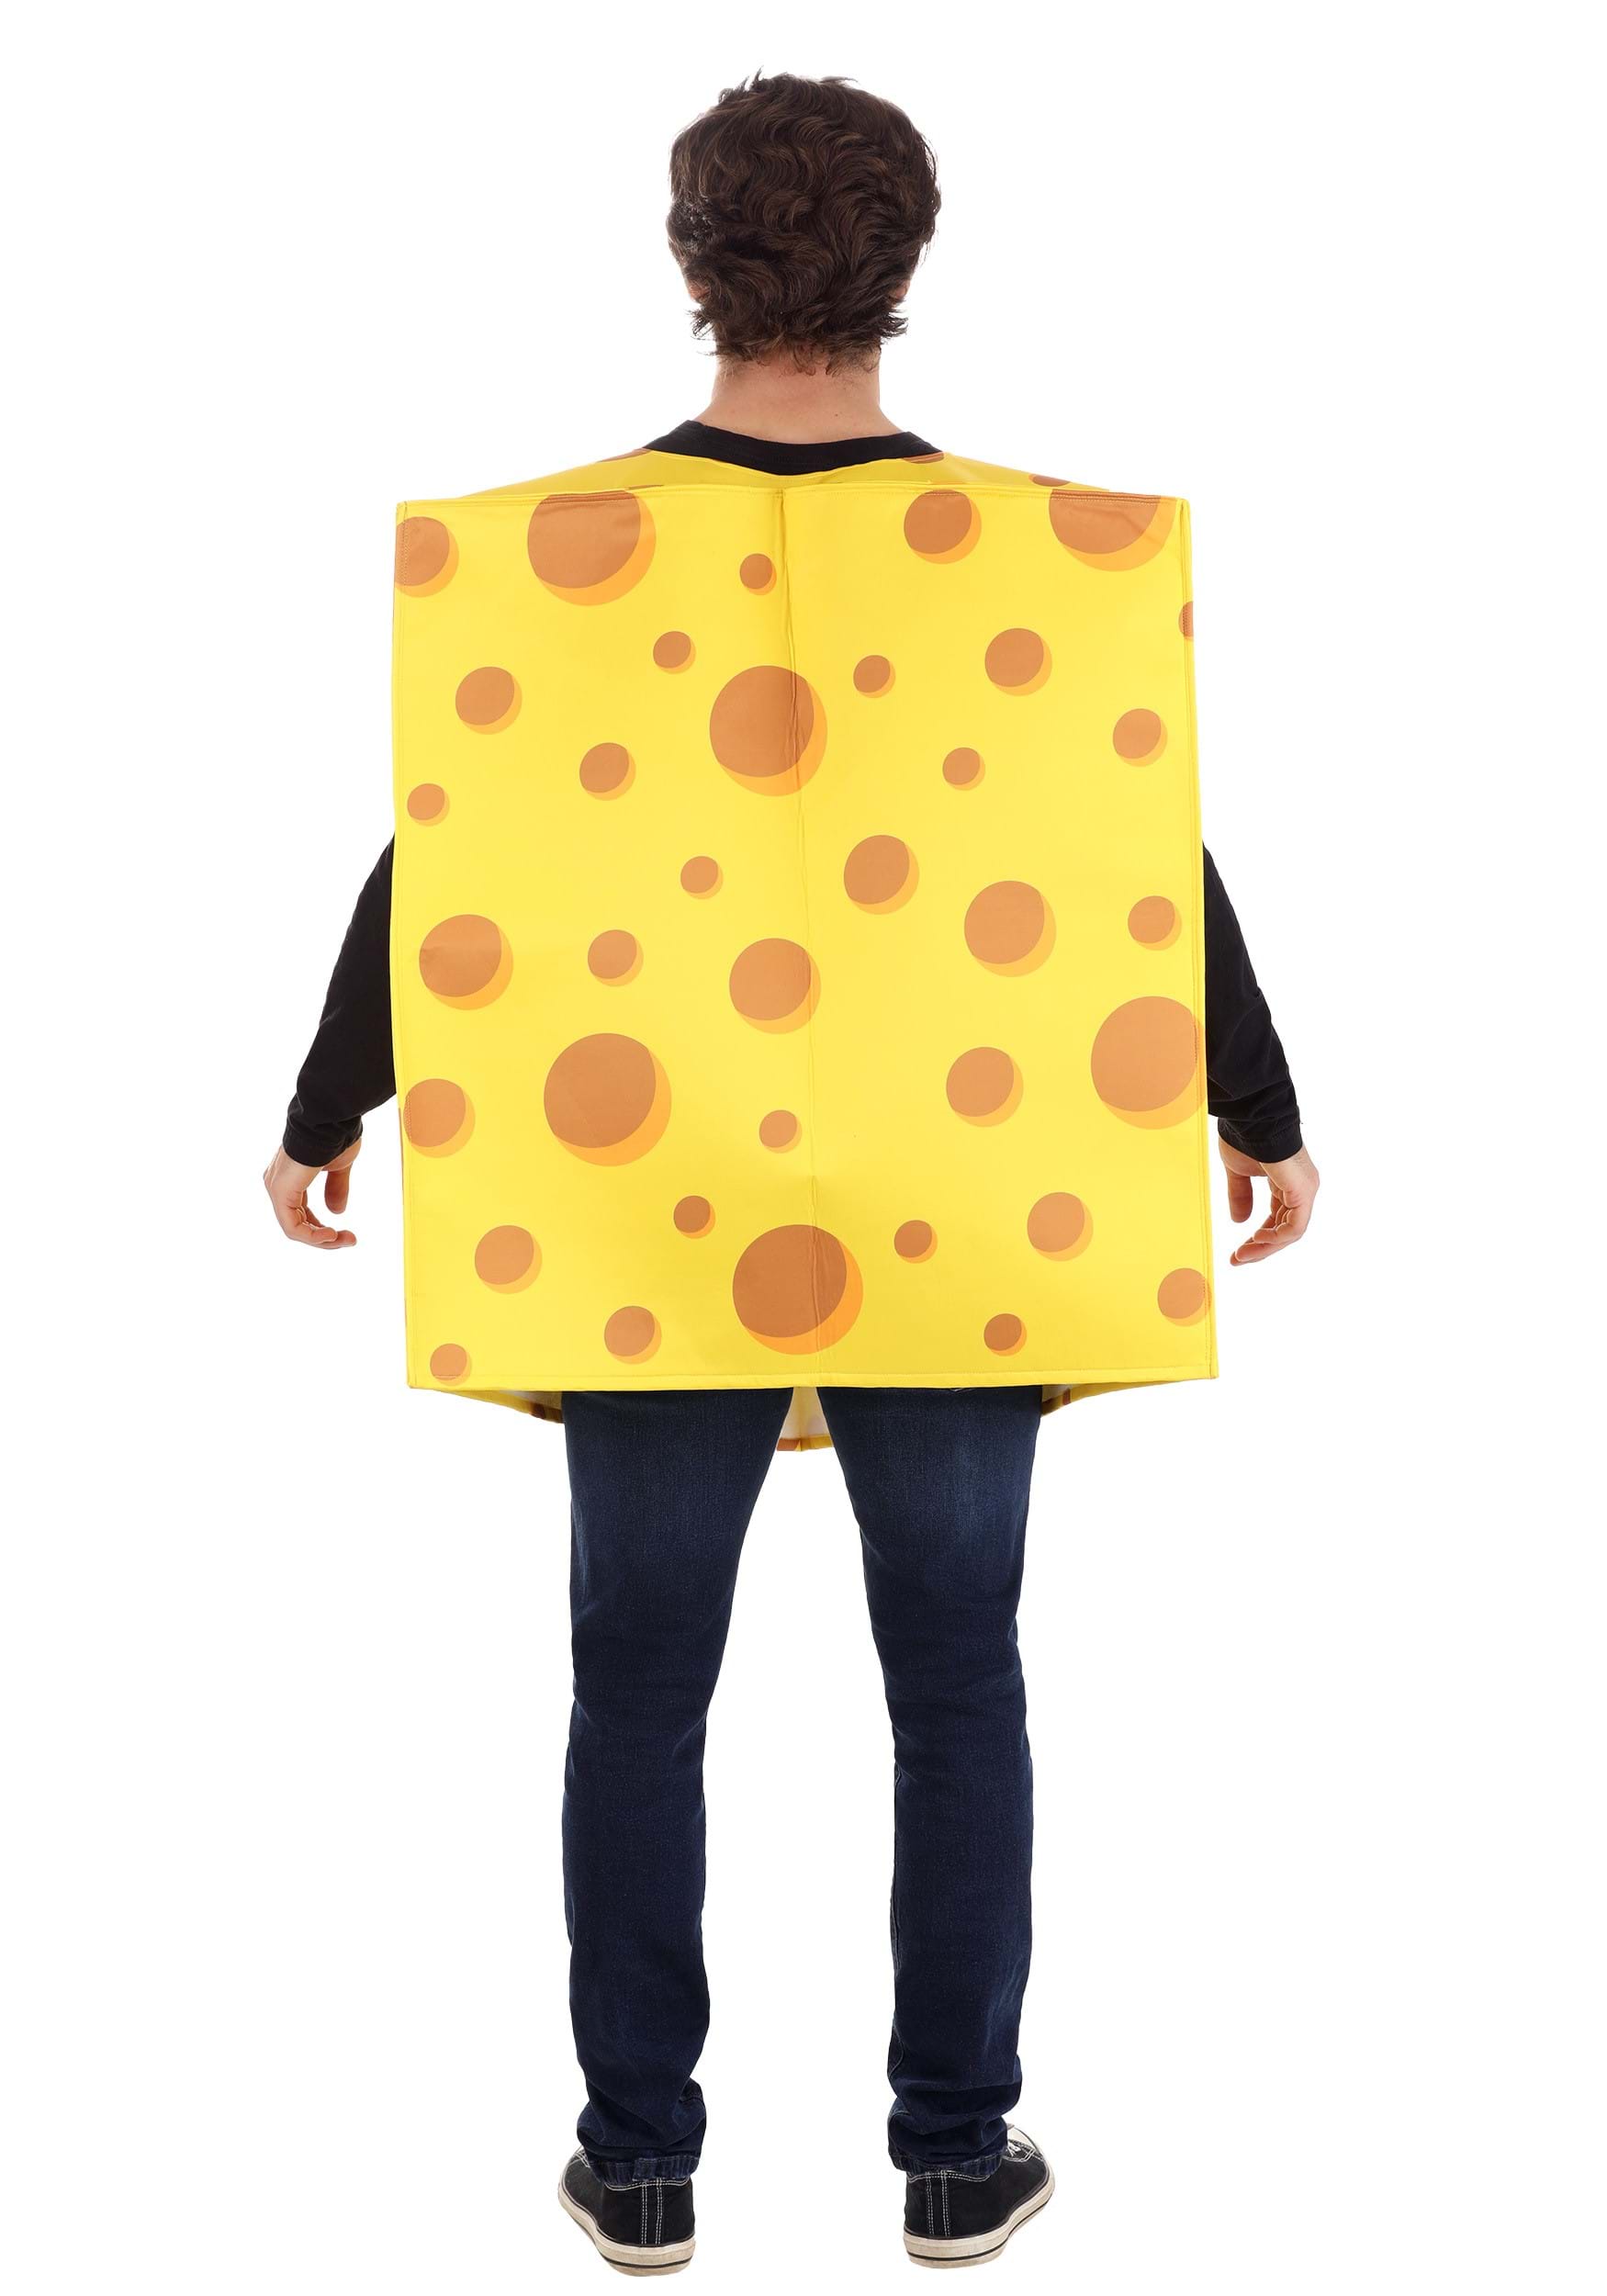 Adult Truly Cheesy Costume